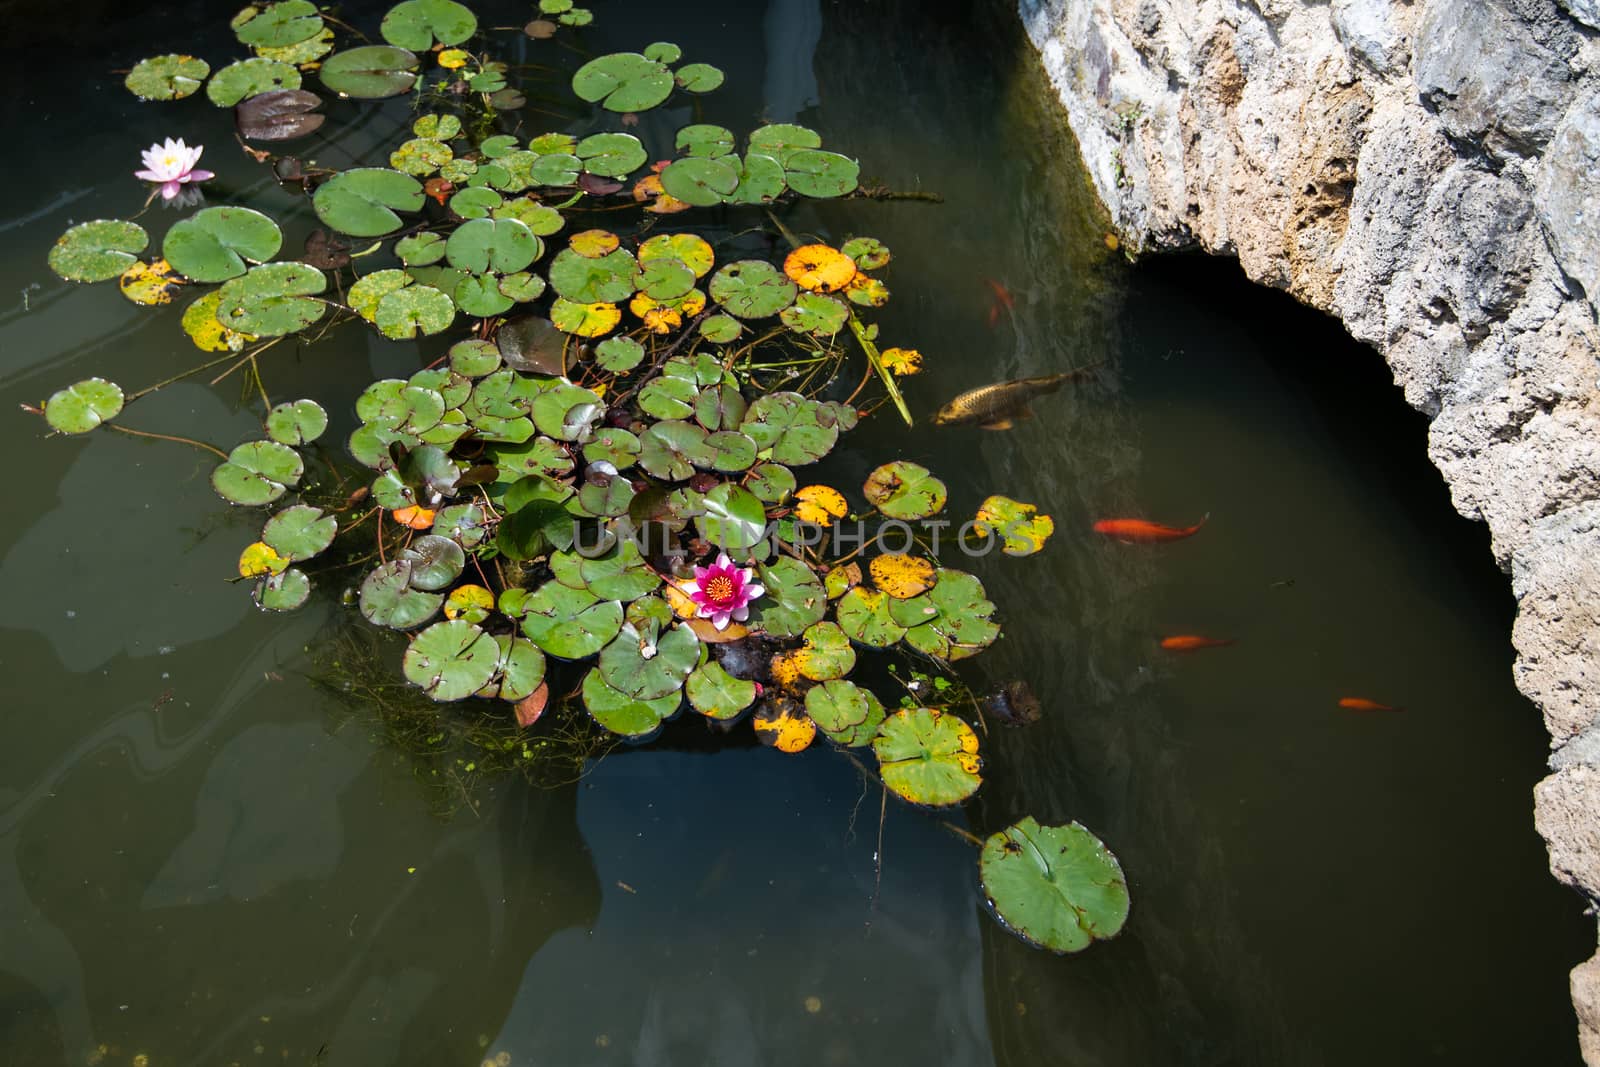 Pond with koi carps and lily pads, lotus flowers by asafaric